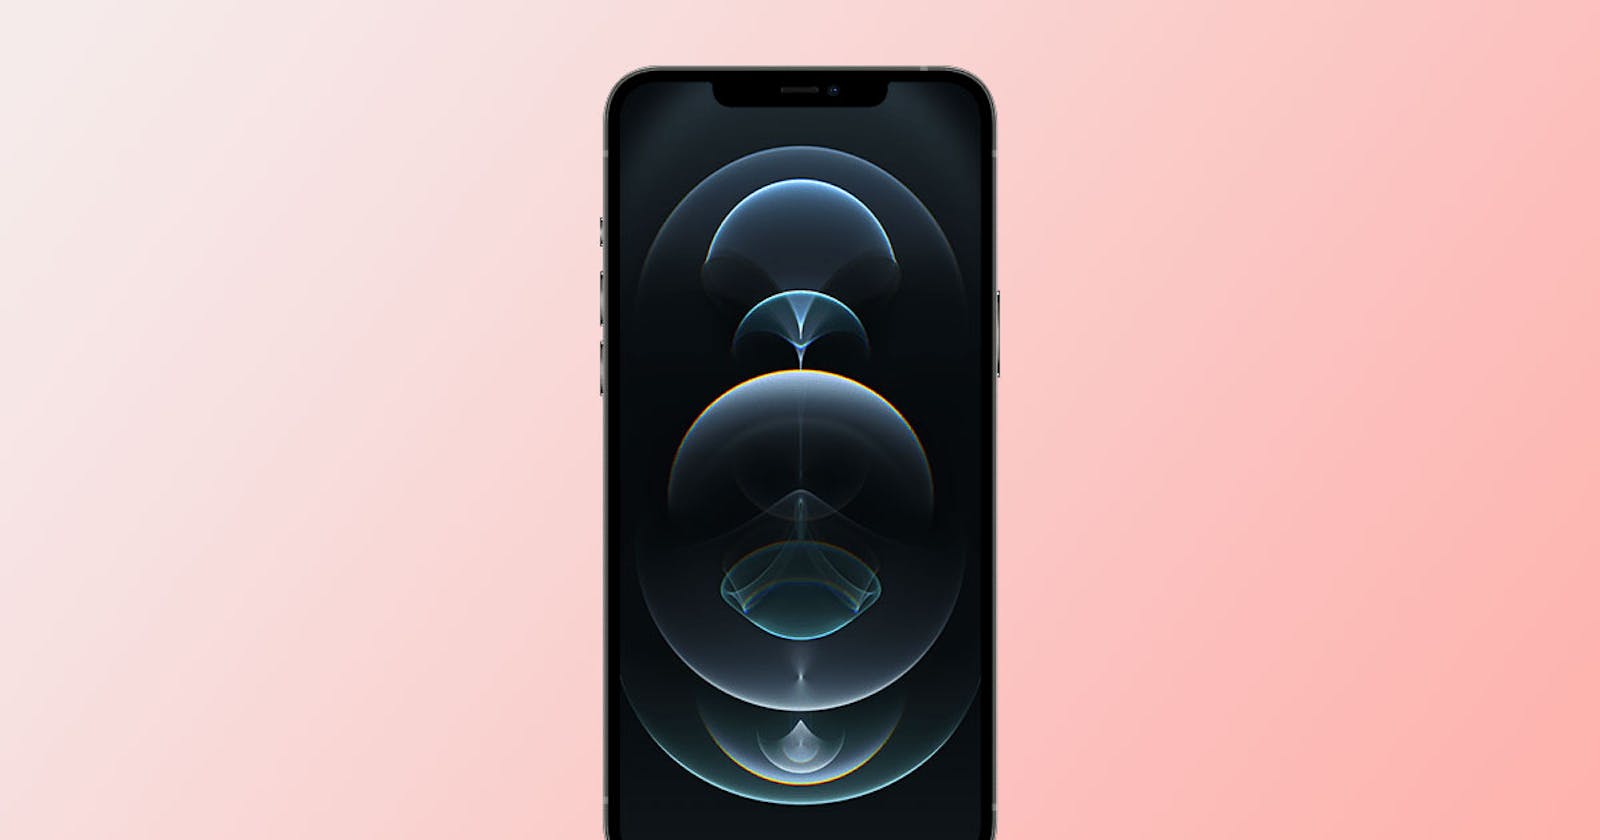 iPhone 12-series viewports, resolution, and screen sizes